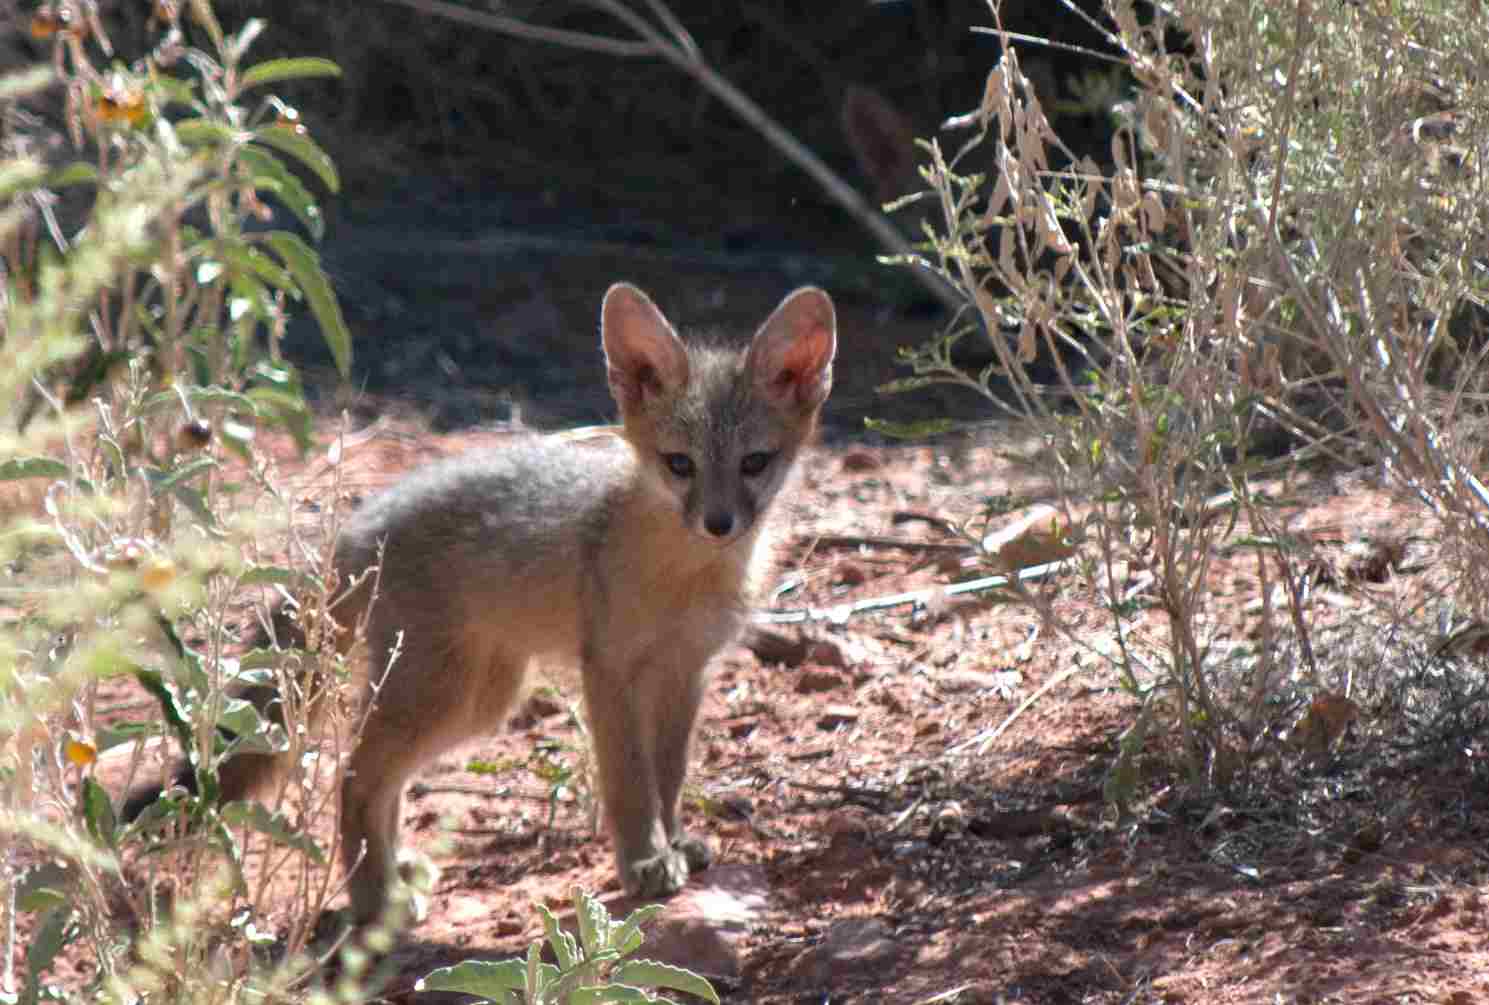 Gray Fox Vs Kit Fox: Taxonomy Reveals Differences Between Gray and Kit Foxes (Credit: Zion National Park 2012 .CC BY 2.0.)